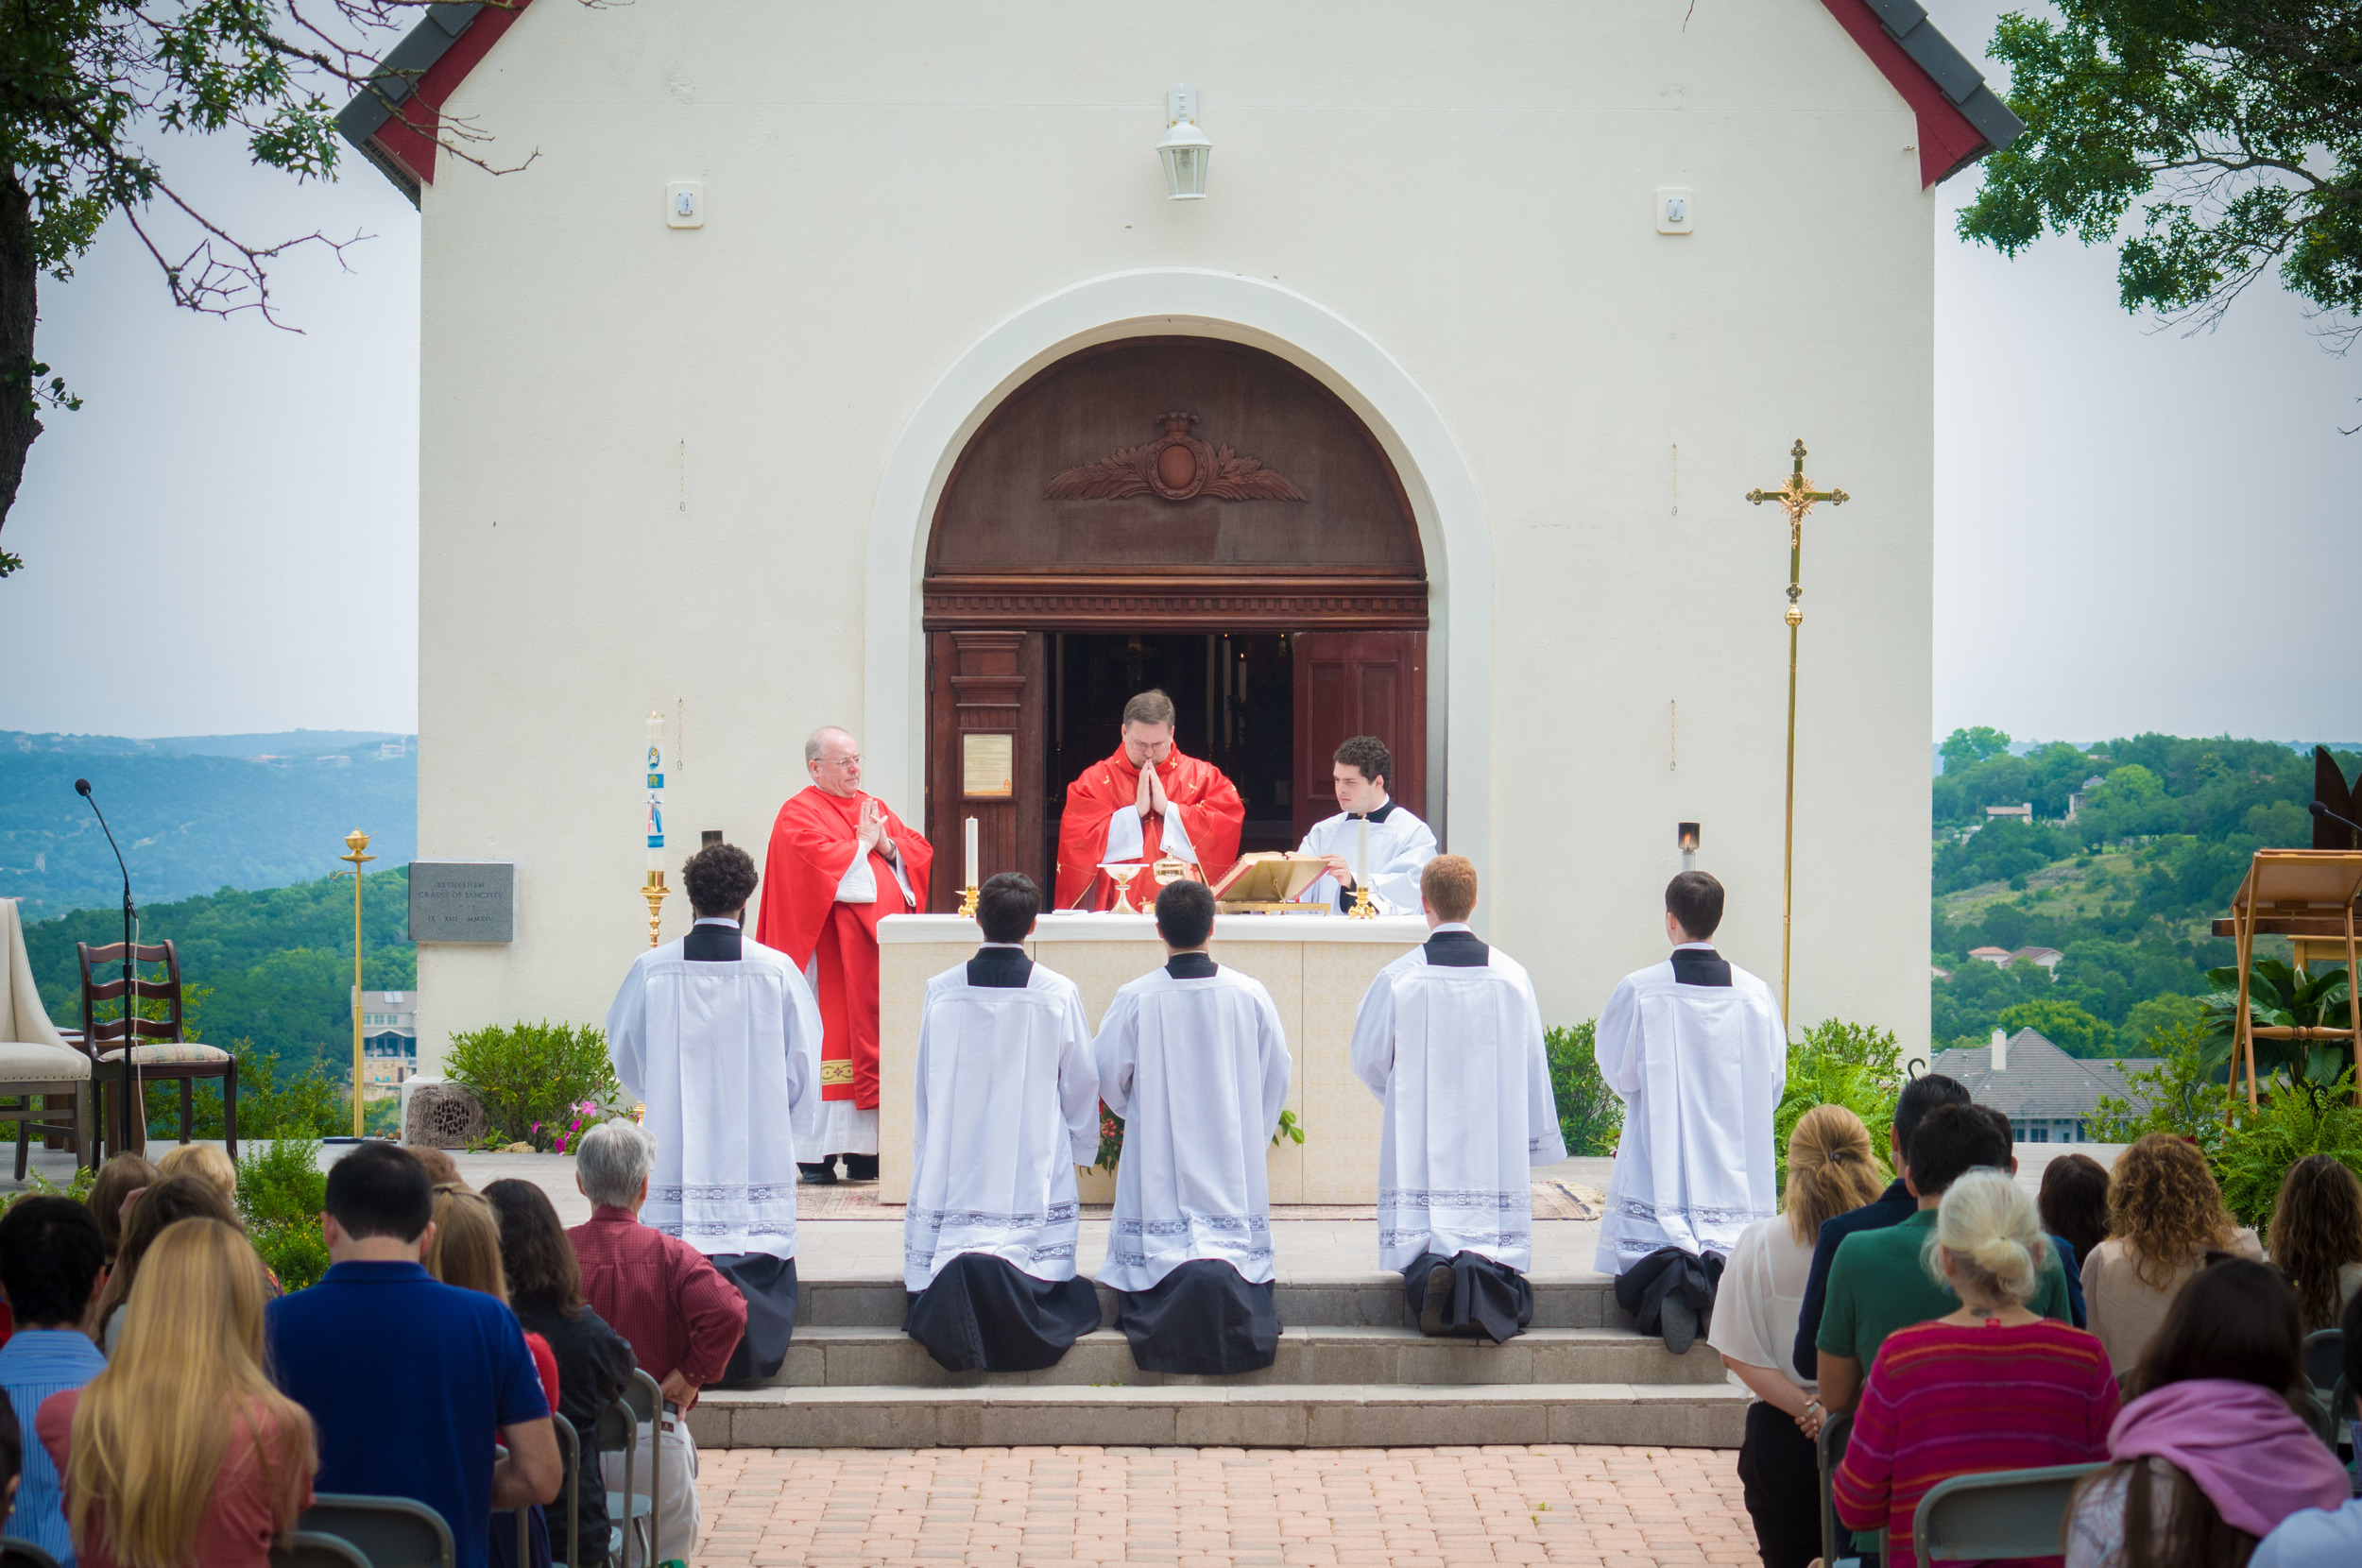  Request a mass for a loved one for a special intention. Mass intentions information available in the Shrine section.&nbsp; 